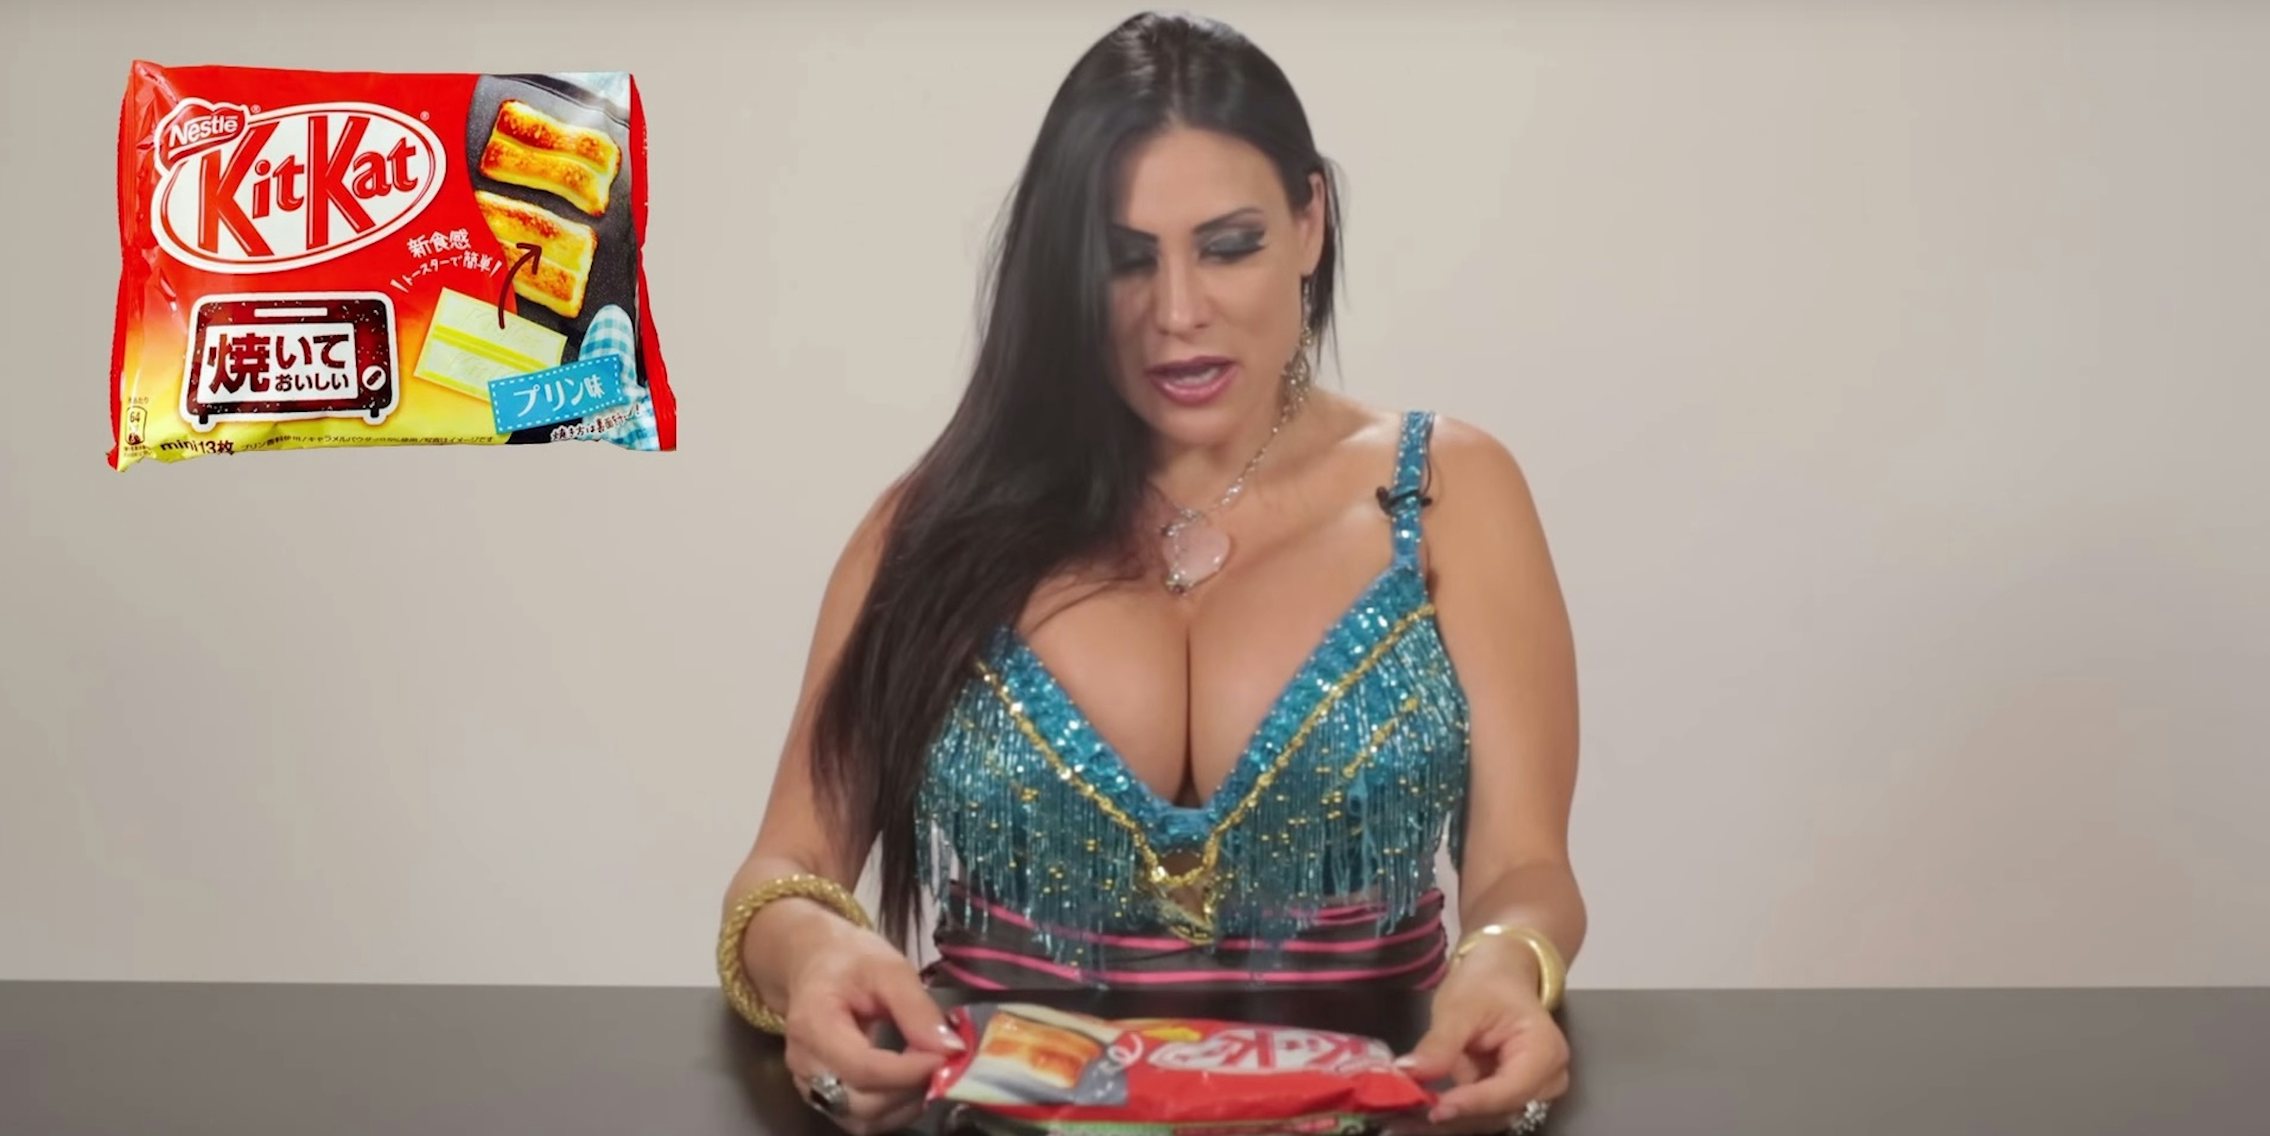 Pornstar Watching Porn - Watch porn stars review candy in a webseries called 'Snaxxx' - The Daily Dot